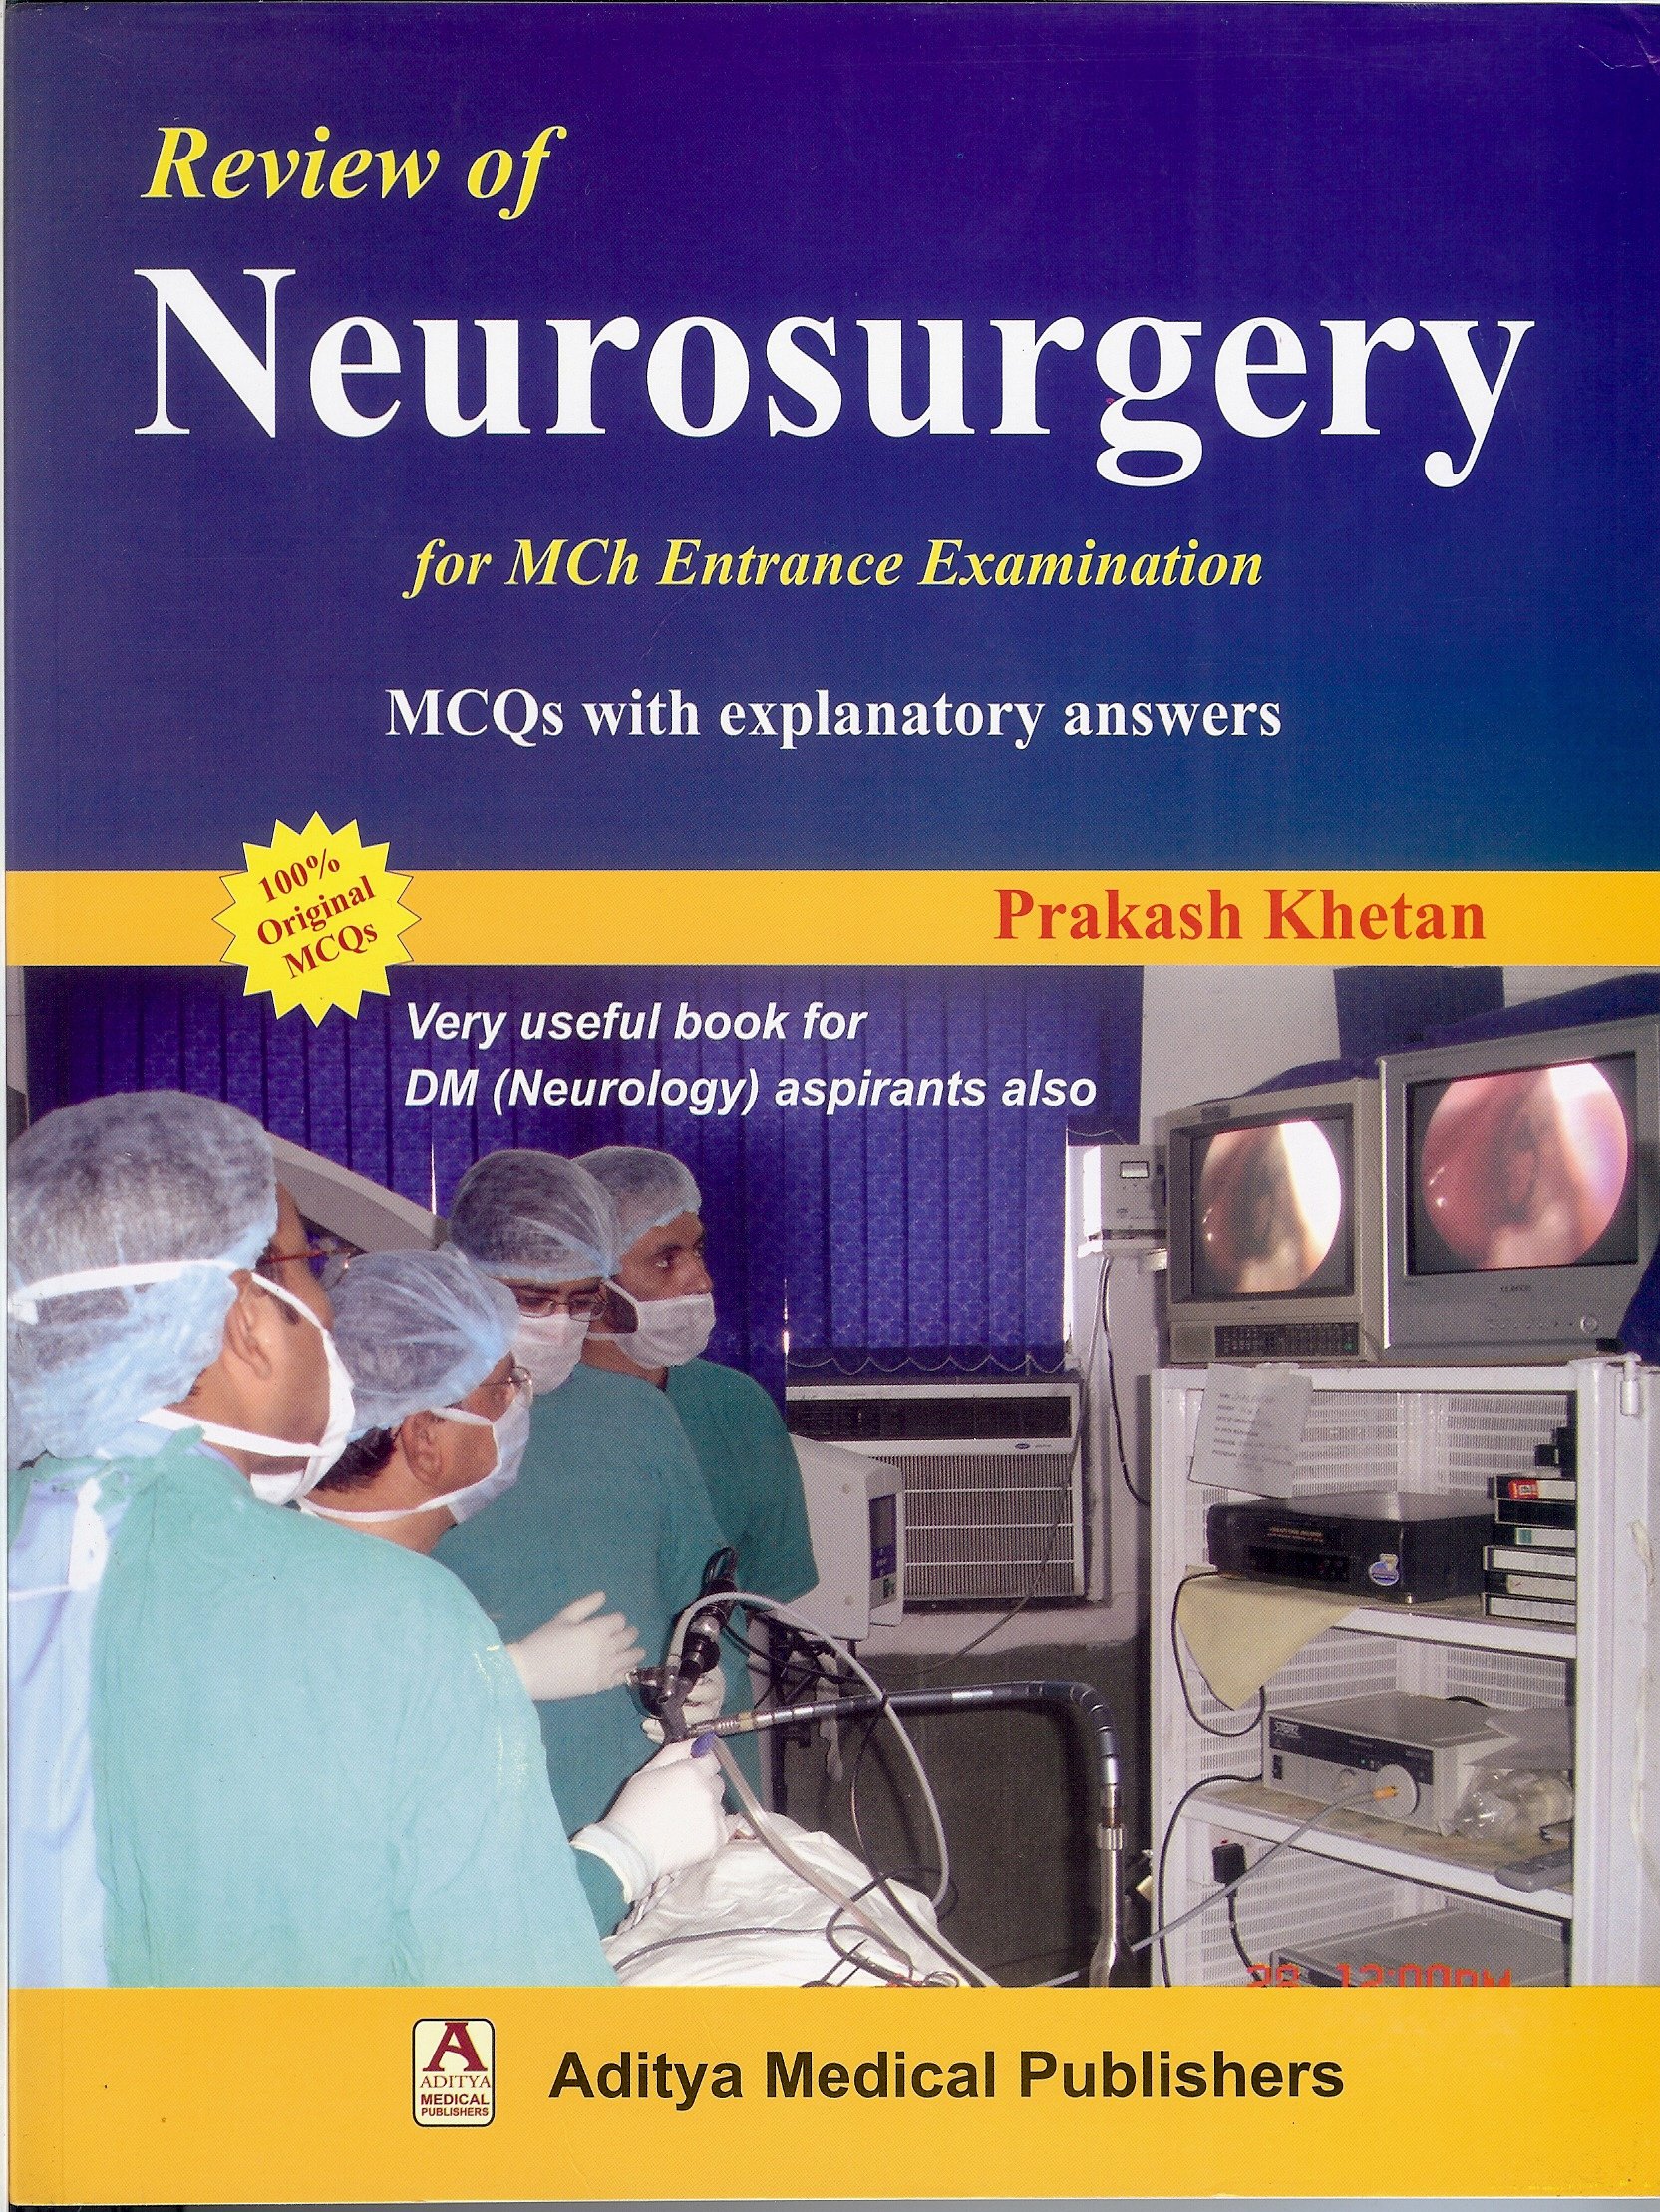 Review Of Neurosurgery For Mch Entrance Examination Mcqs With Explanatory Answers